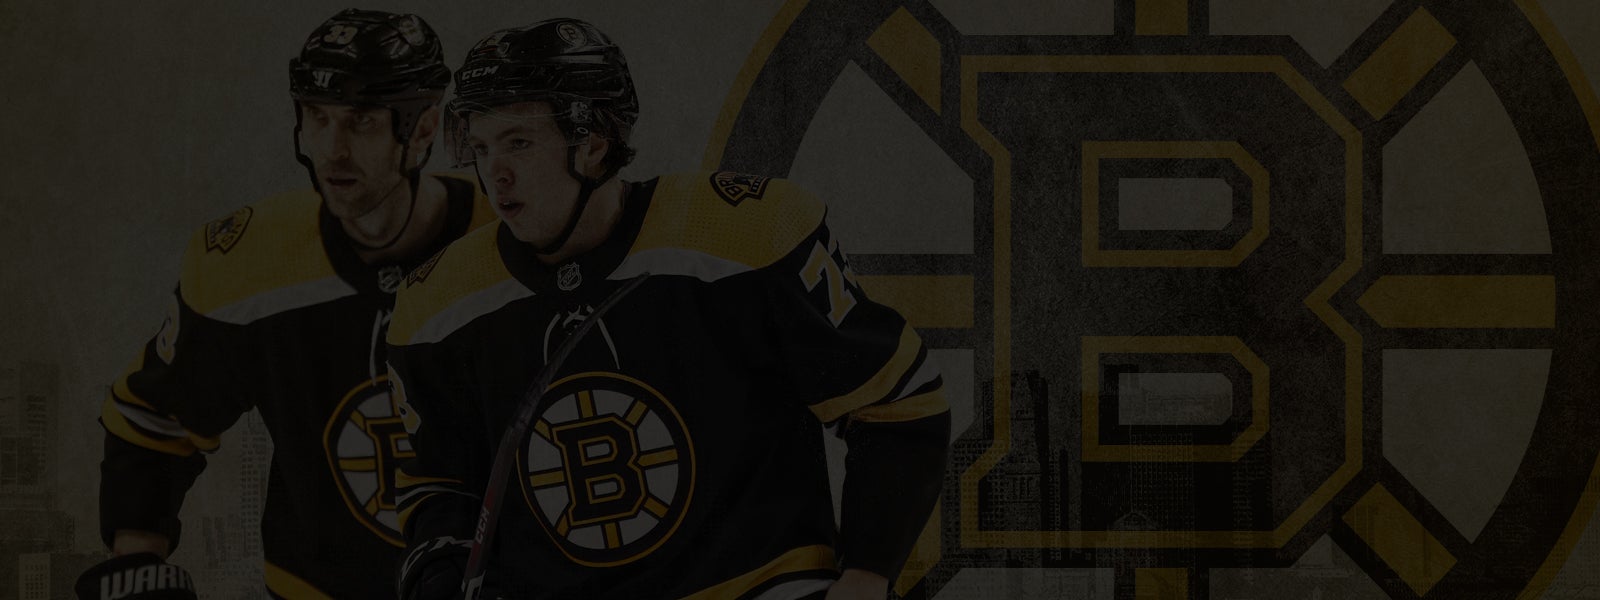  Bruins vs. Red Wings  - Canceled